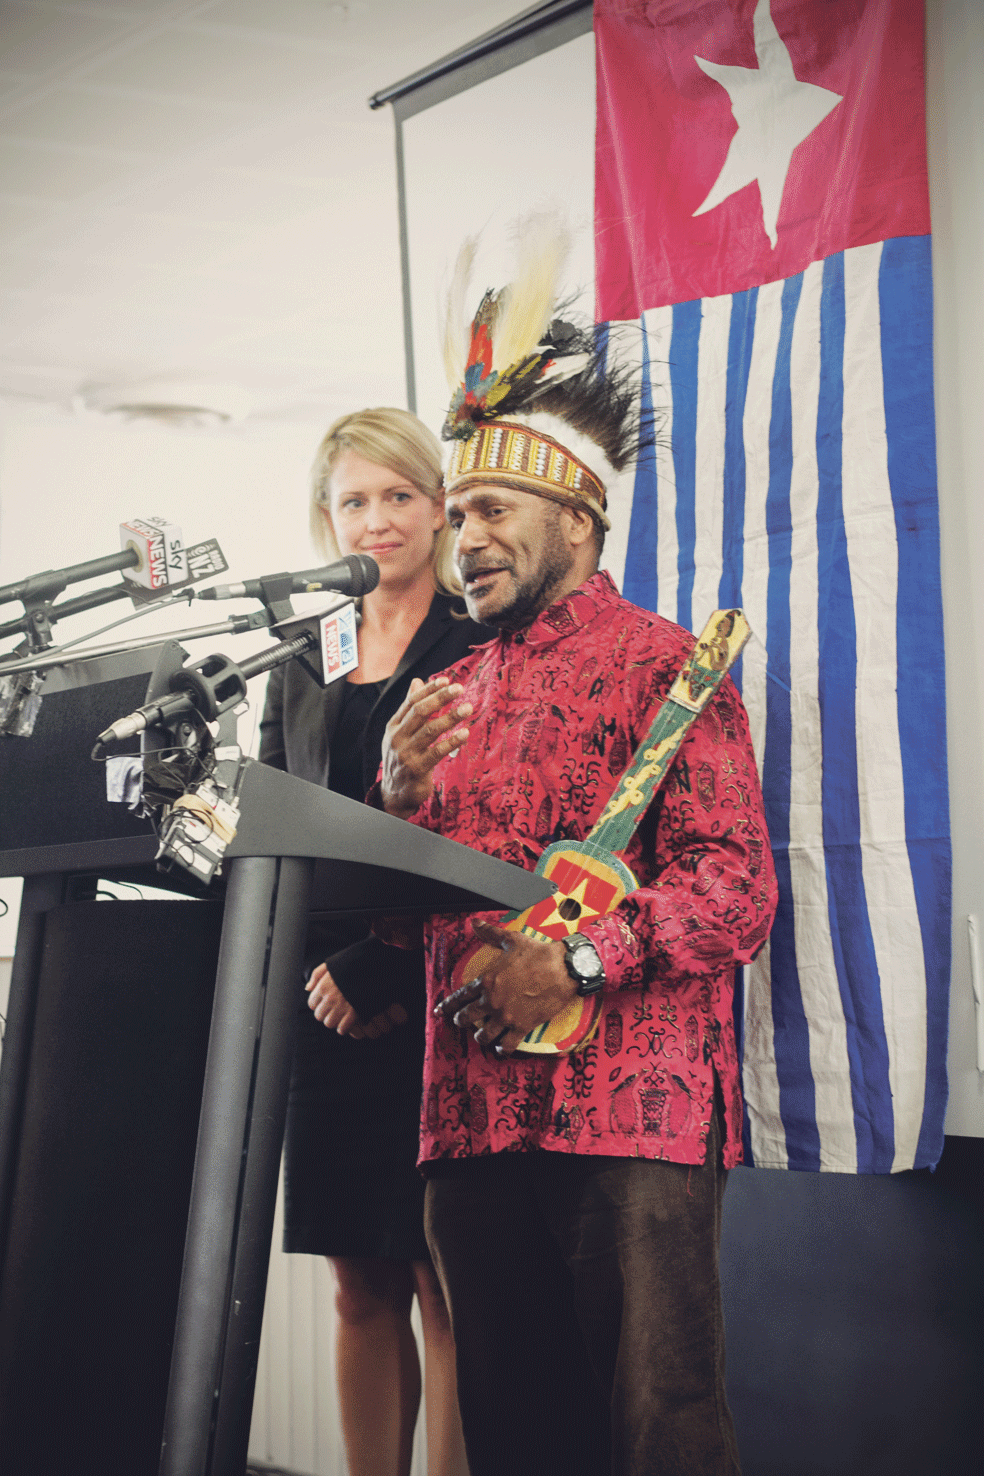 W Papuan leader barred from Parliament Archdiocese of Wellington